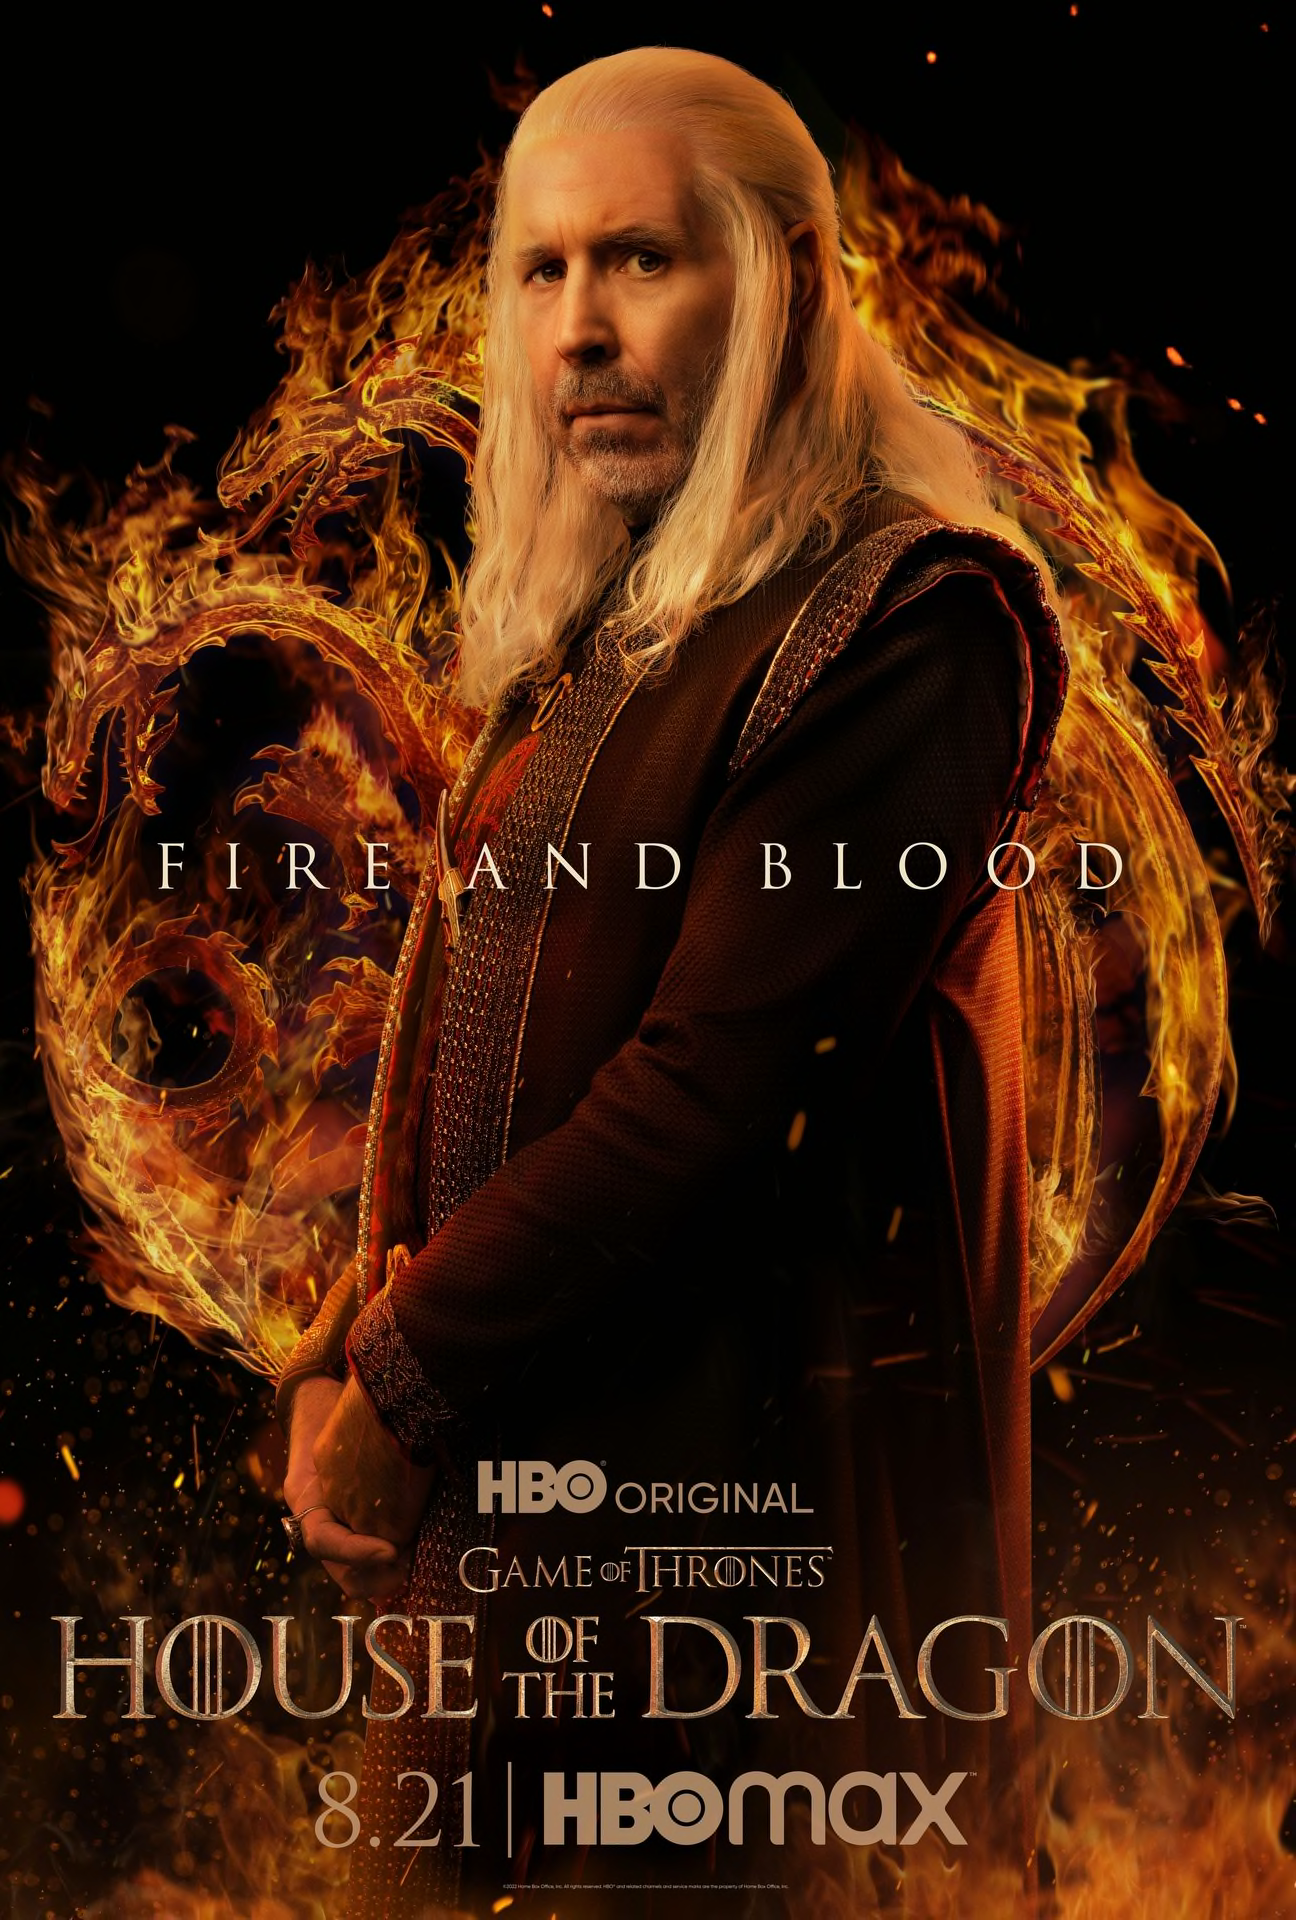 Crazy New Posters Of House of The Dragon Season 2!